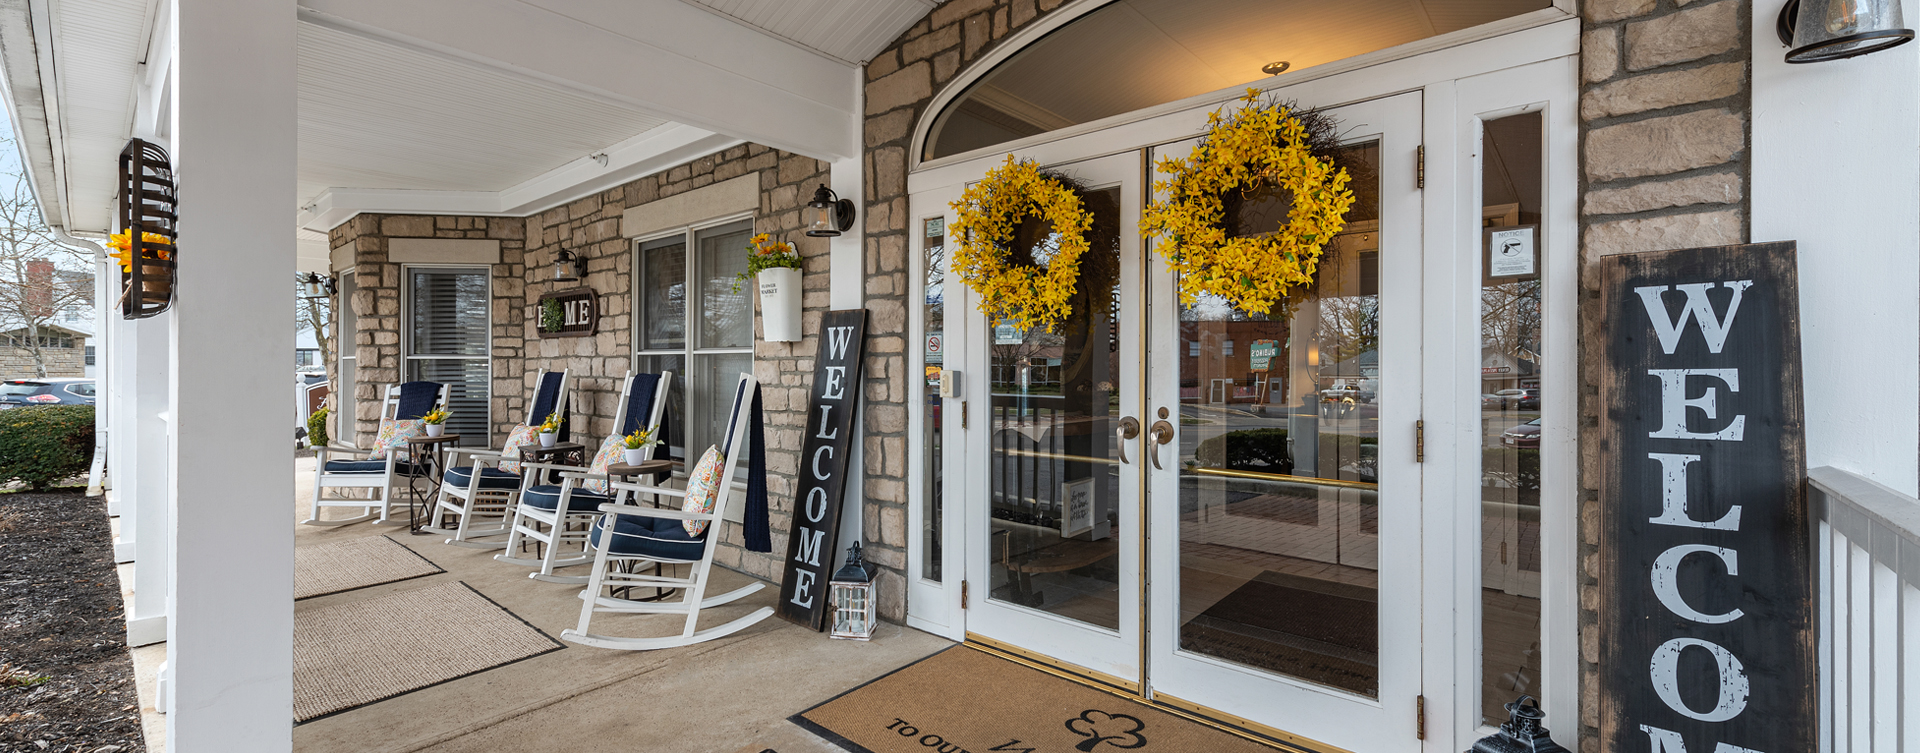 Enjoy conversations with friends on the porch at Bickford of Bexley